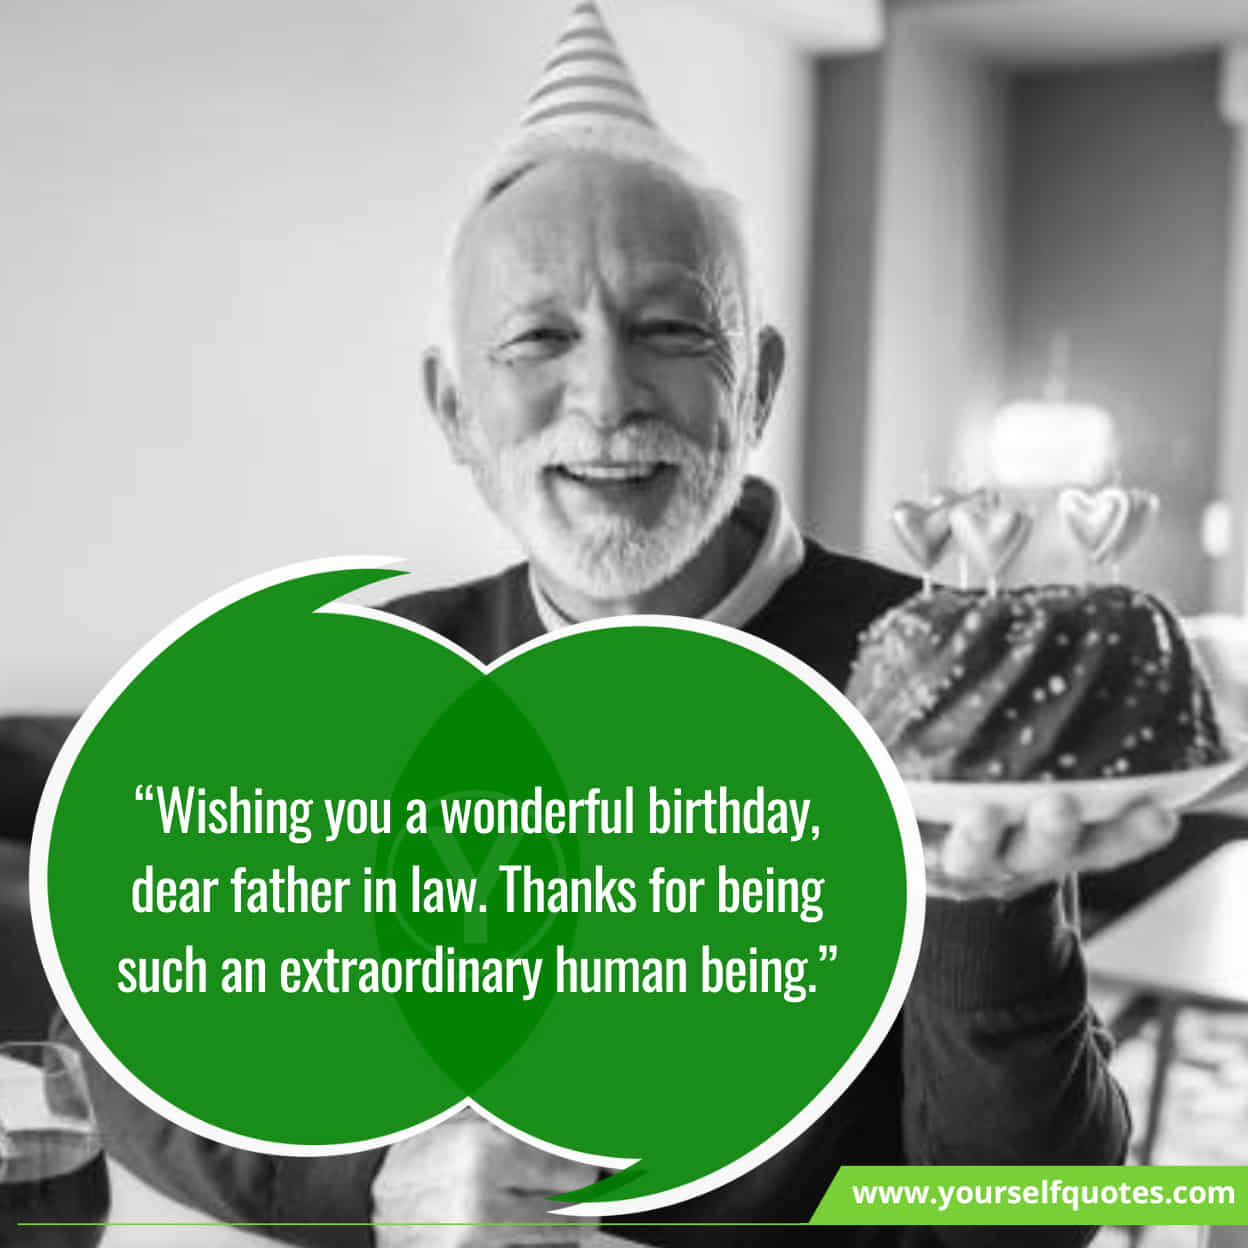 Exciting Wishes About Father-In-Law's Birthday